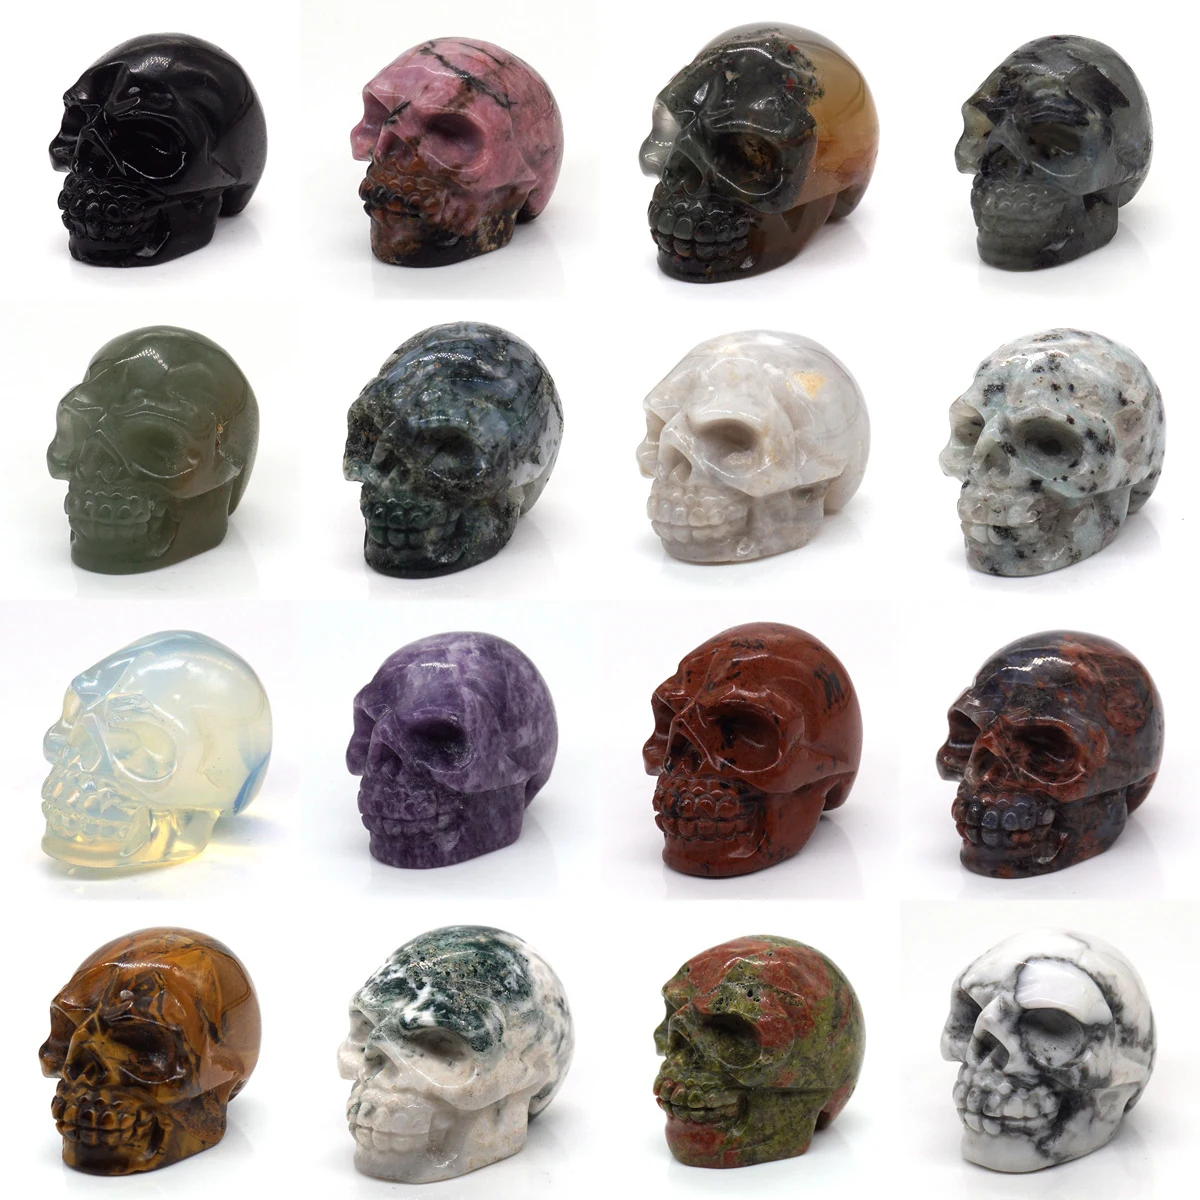 

1.5" Skull Statue Natural Stones Carved Healing Crystals Ornament Reiki Witchcraft Supplies Gemstone Wicca Halloween